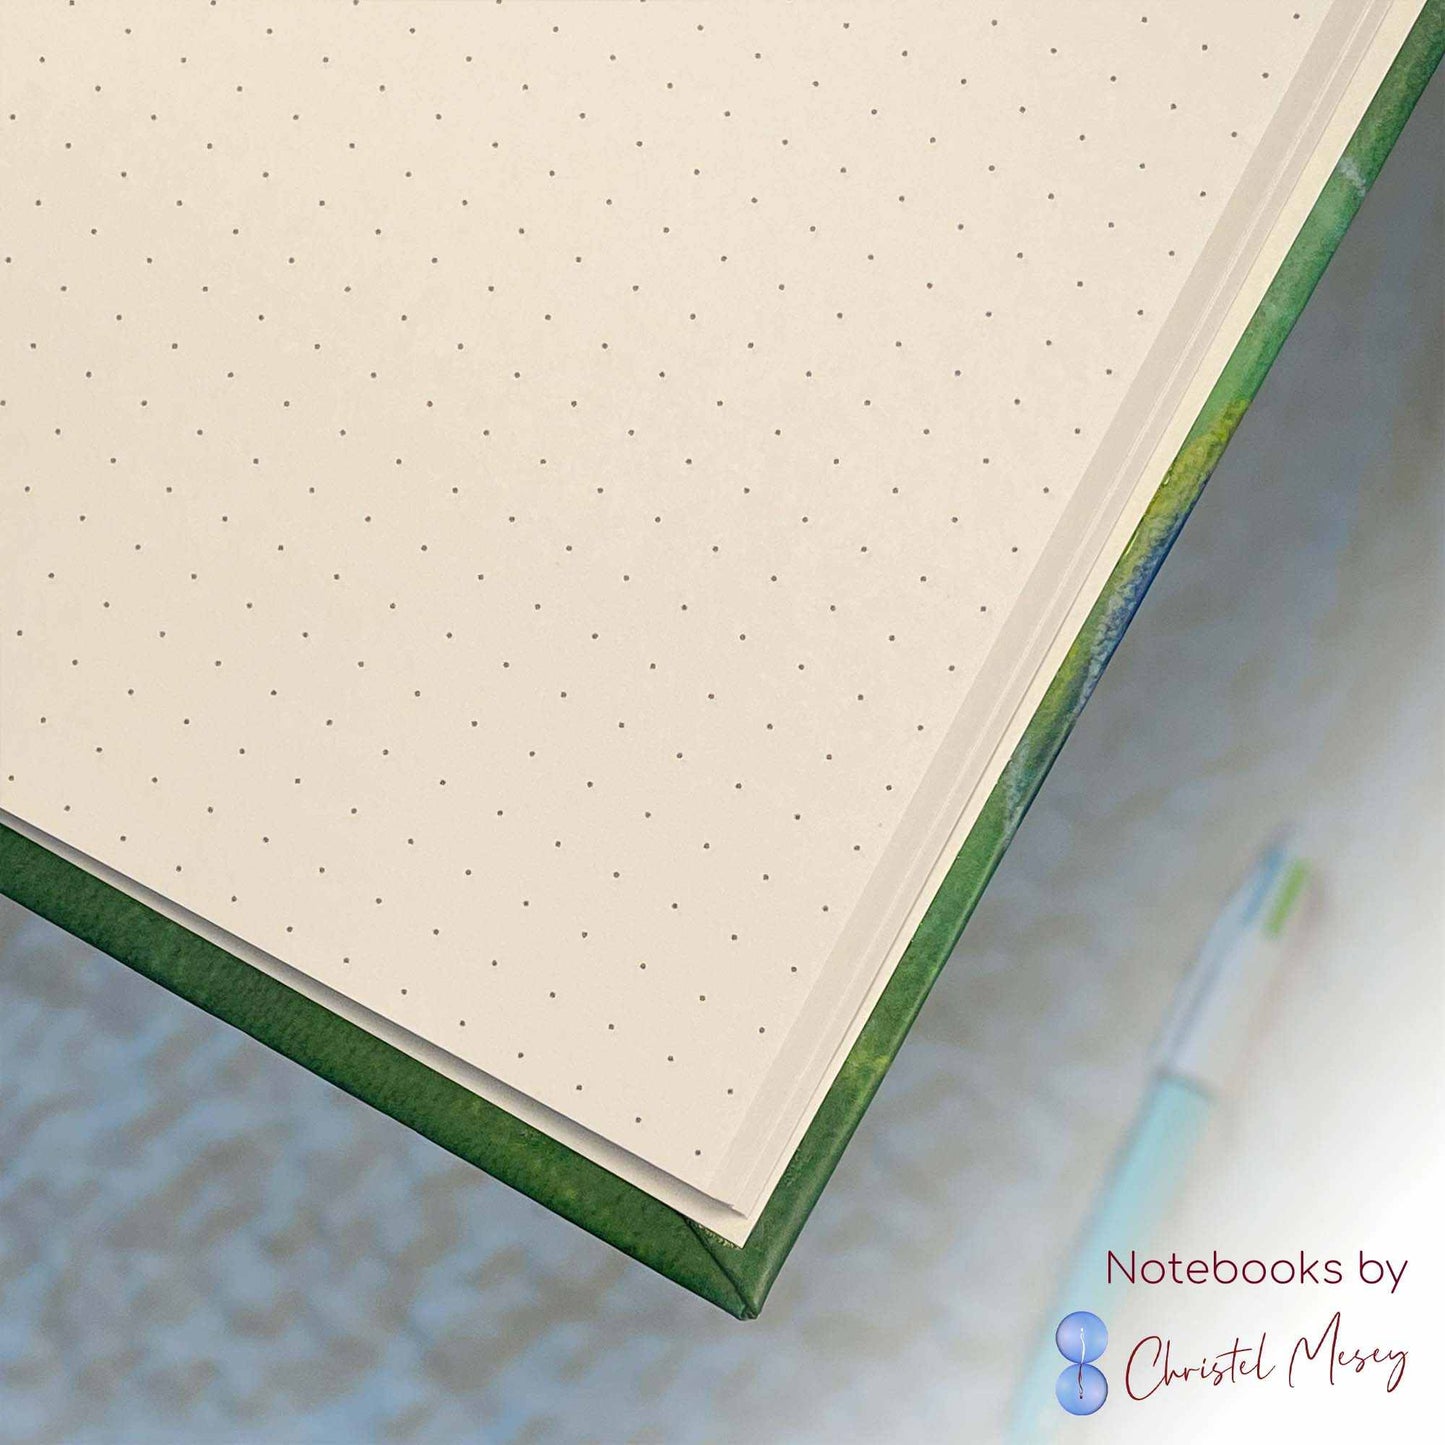 NOTEBOOK - Community - HardcoverNOTEBOOK - Community - Hardcover with Dotted pages